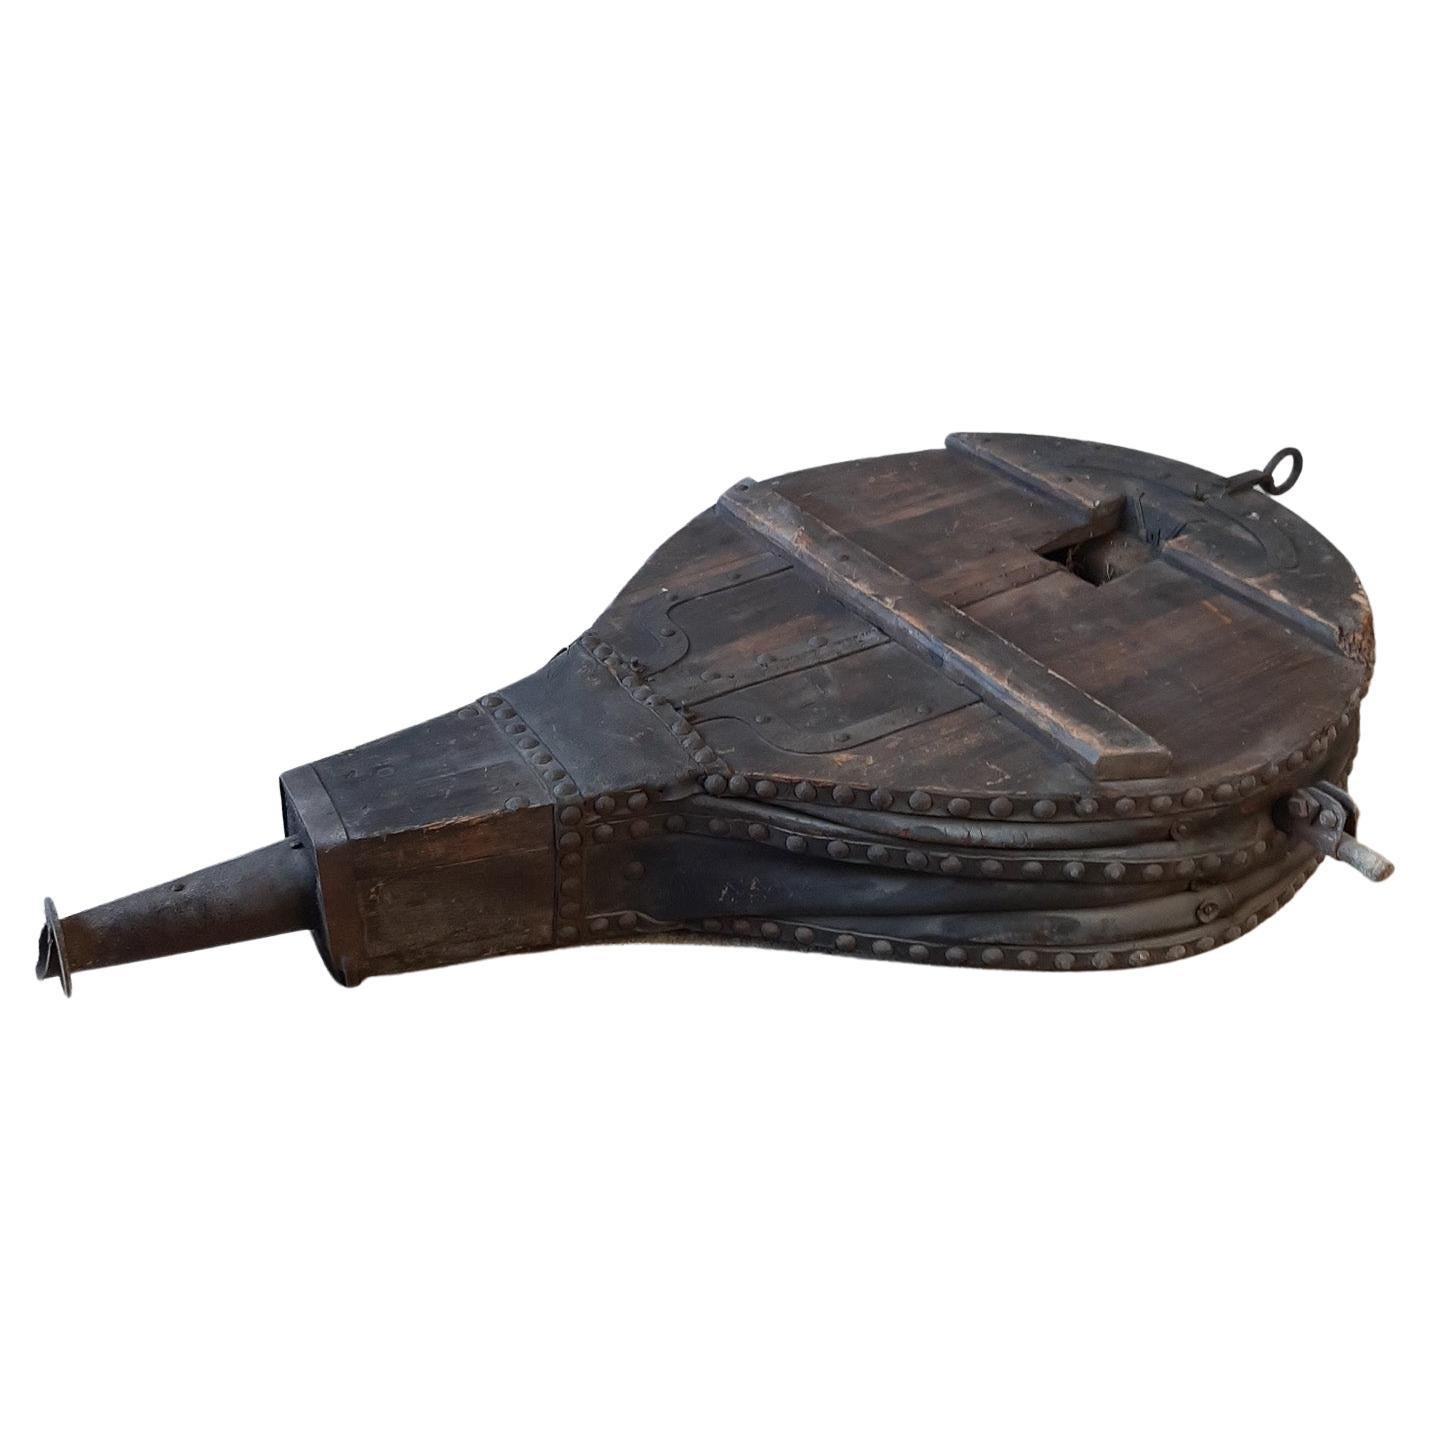 Striking 19th Century Leather, Wrought Iron, and Pine Blacksmith Bellows.

These antique XXL Bellows once fueled the fires of an old forge. Despite minor damages to the leather, they continue to operate effectively. Enhanced with a waxed finish in a